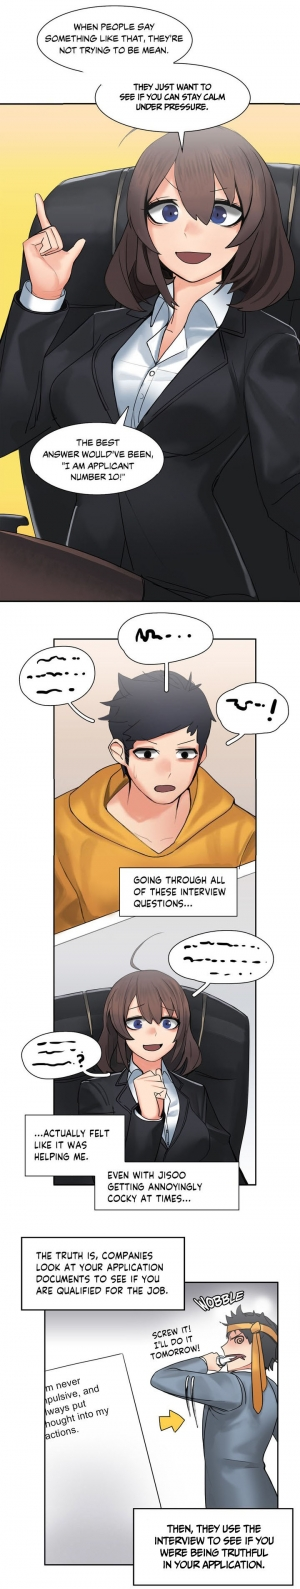 [Gaehoju, Gunnermul] The Girl That Got Stuck in the Wall Ch.11/11 [COMPLETED] [English] [Hentai Universe] - Page 60